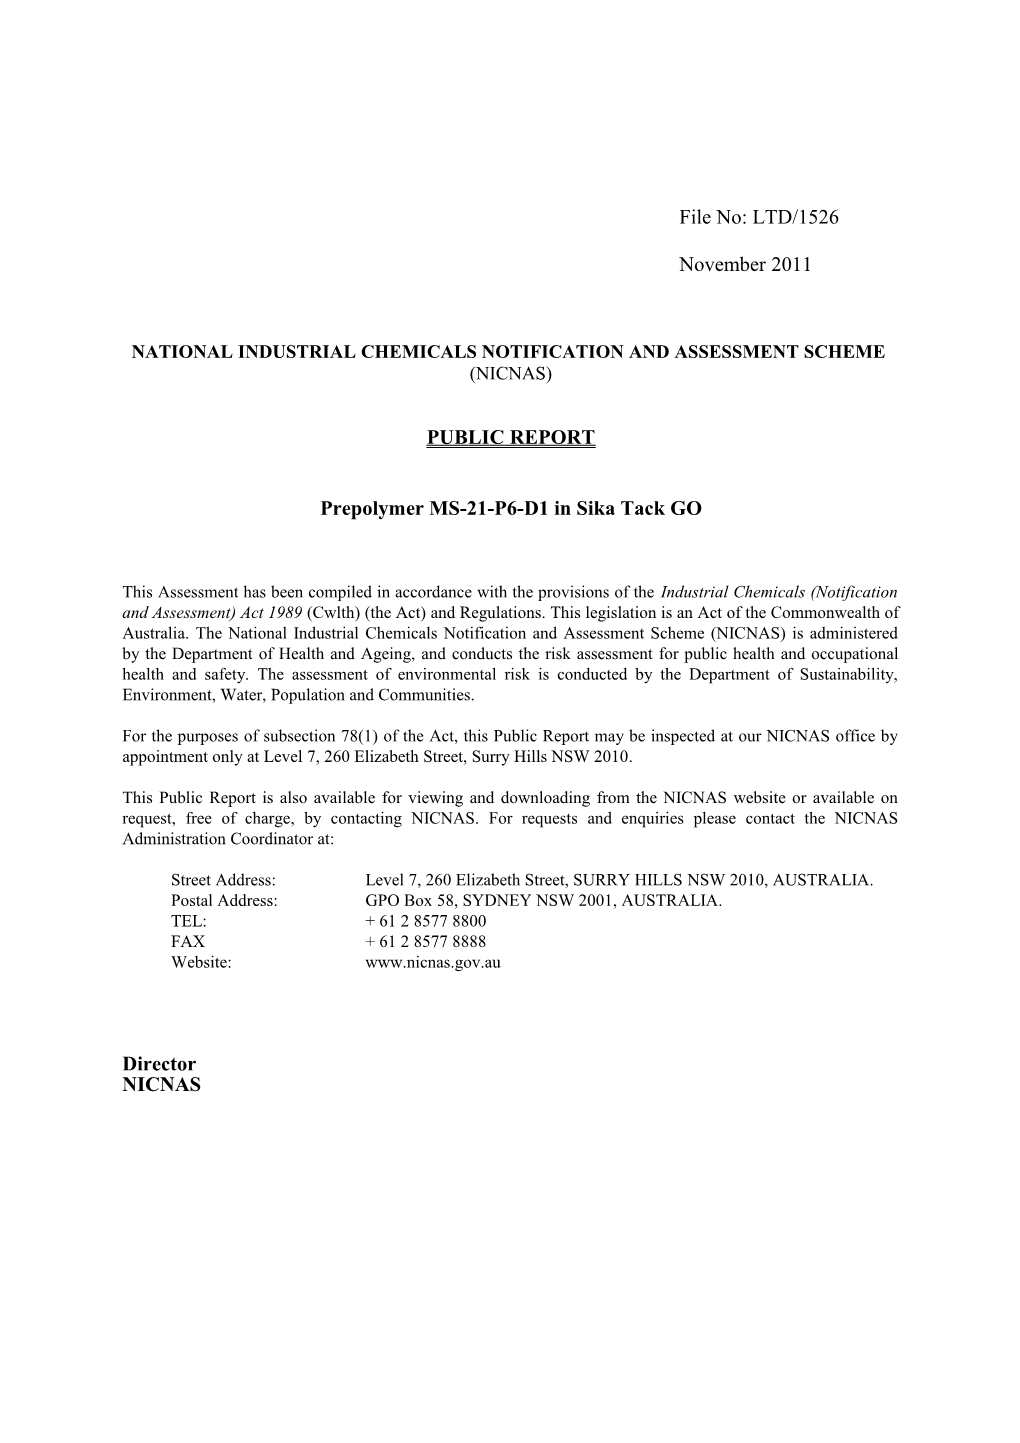 National Industrial Chemicals Notification and Assessment Scheme s22